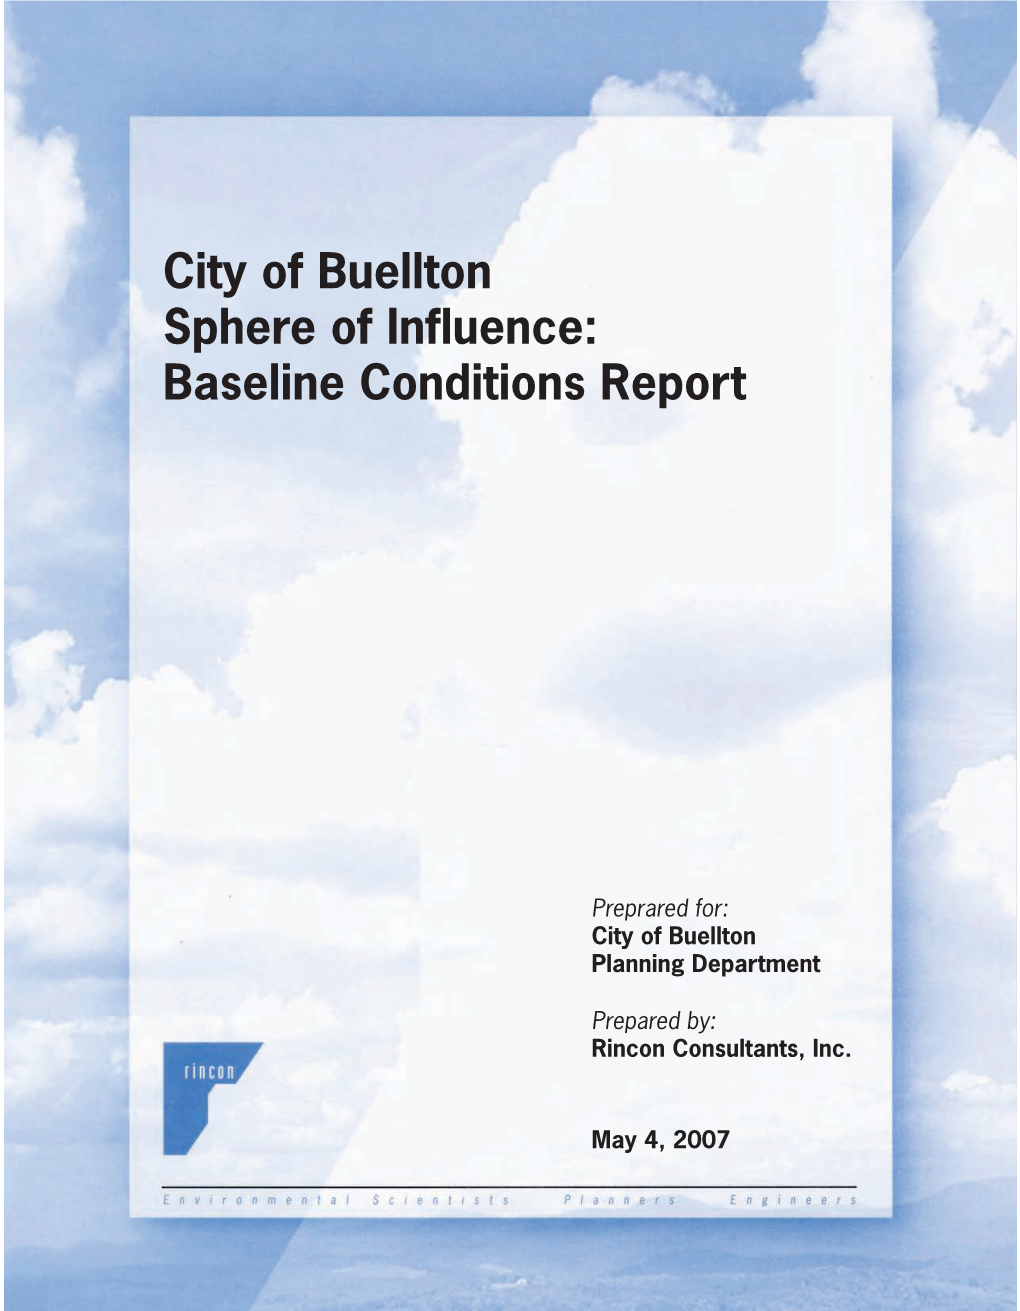 City of Buellton Sphere of Influence: Baseline Conditions Report